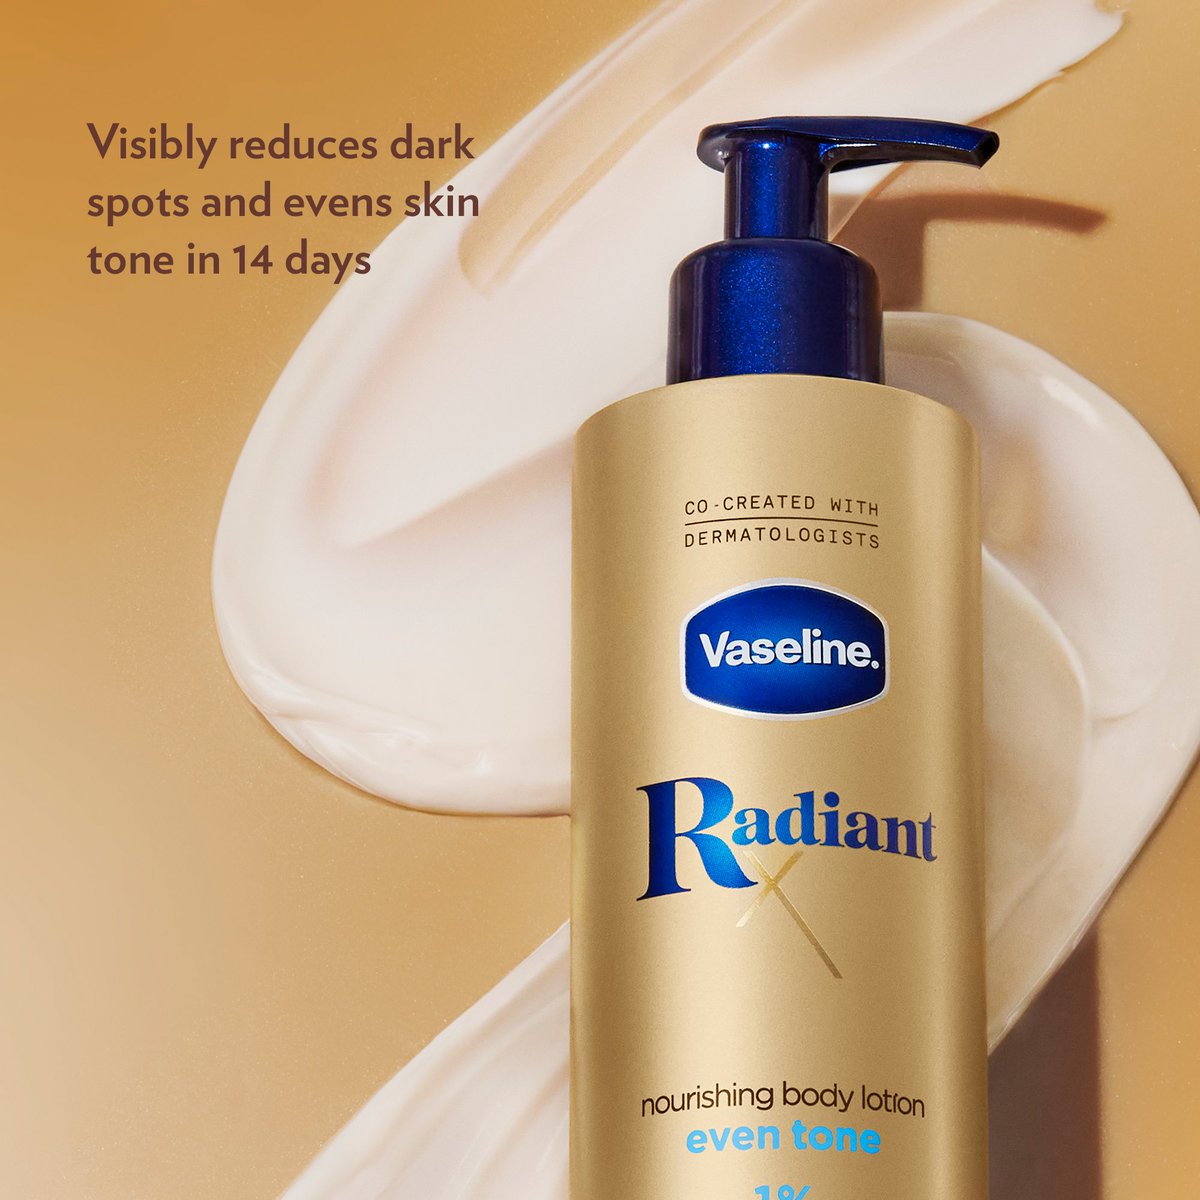 Looking for your perfect body lotion 👀 ​ Find your match by swiping once for dull skin, twice for dry skin, and three times for dark spots 🧴 #Vaseline #BodyLotion #BodycareProducts #SkincareRoutine